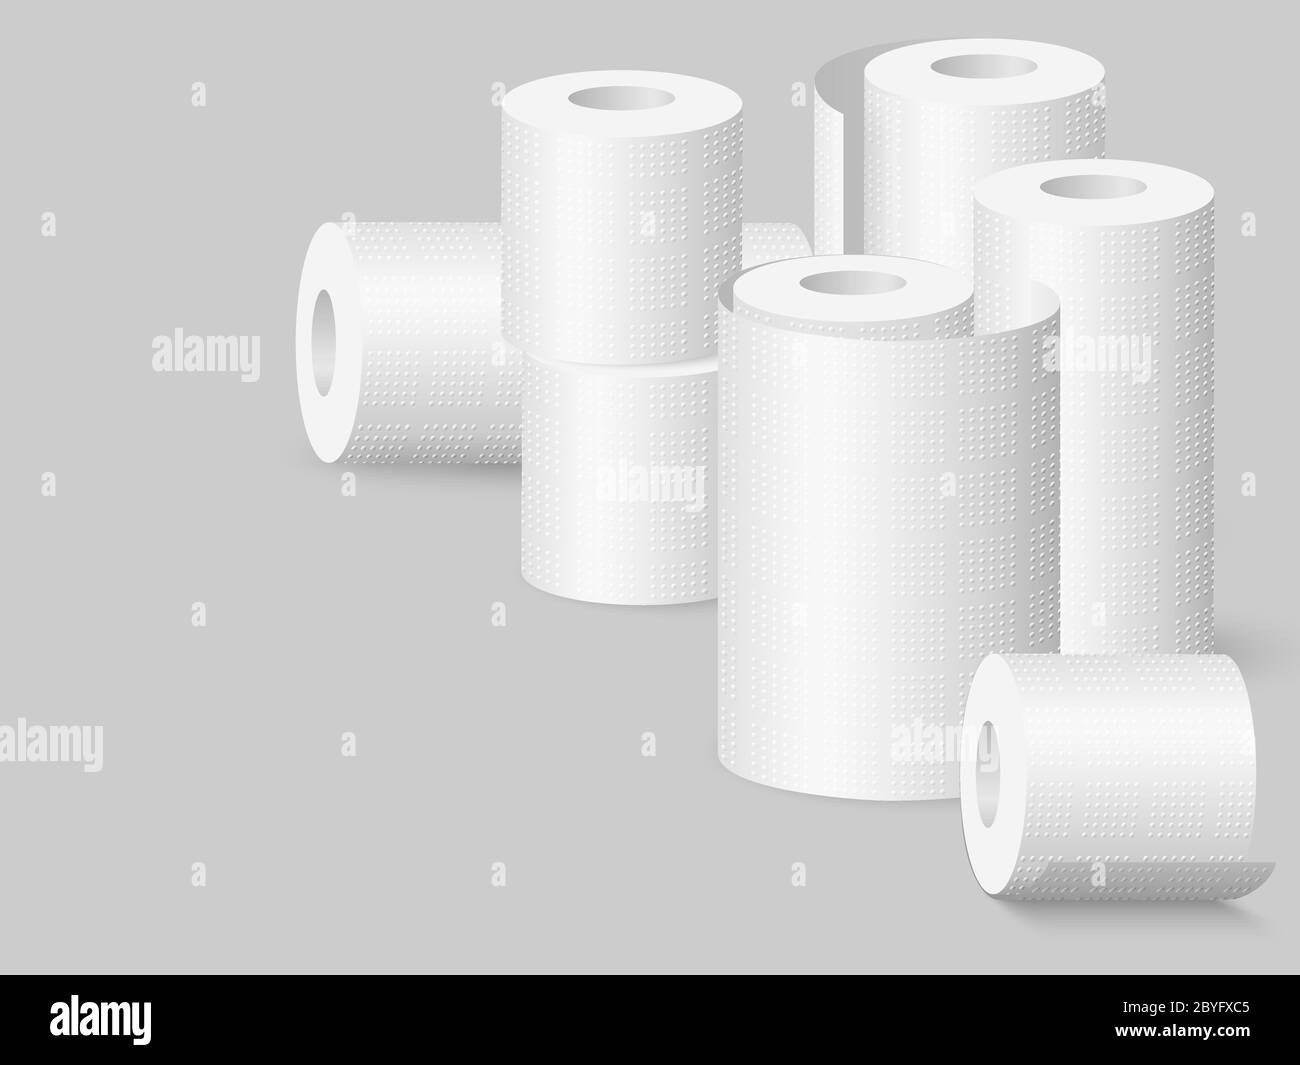 Set of kitchen towels and toilet paper rolls. Stock Vector